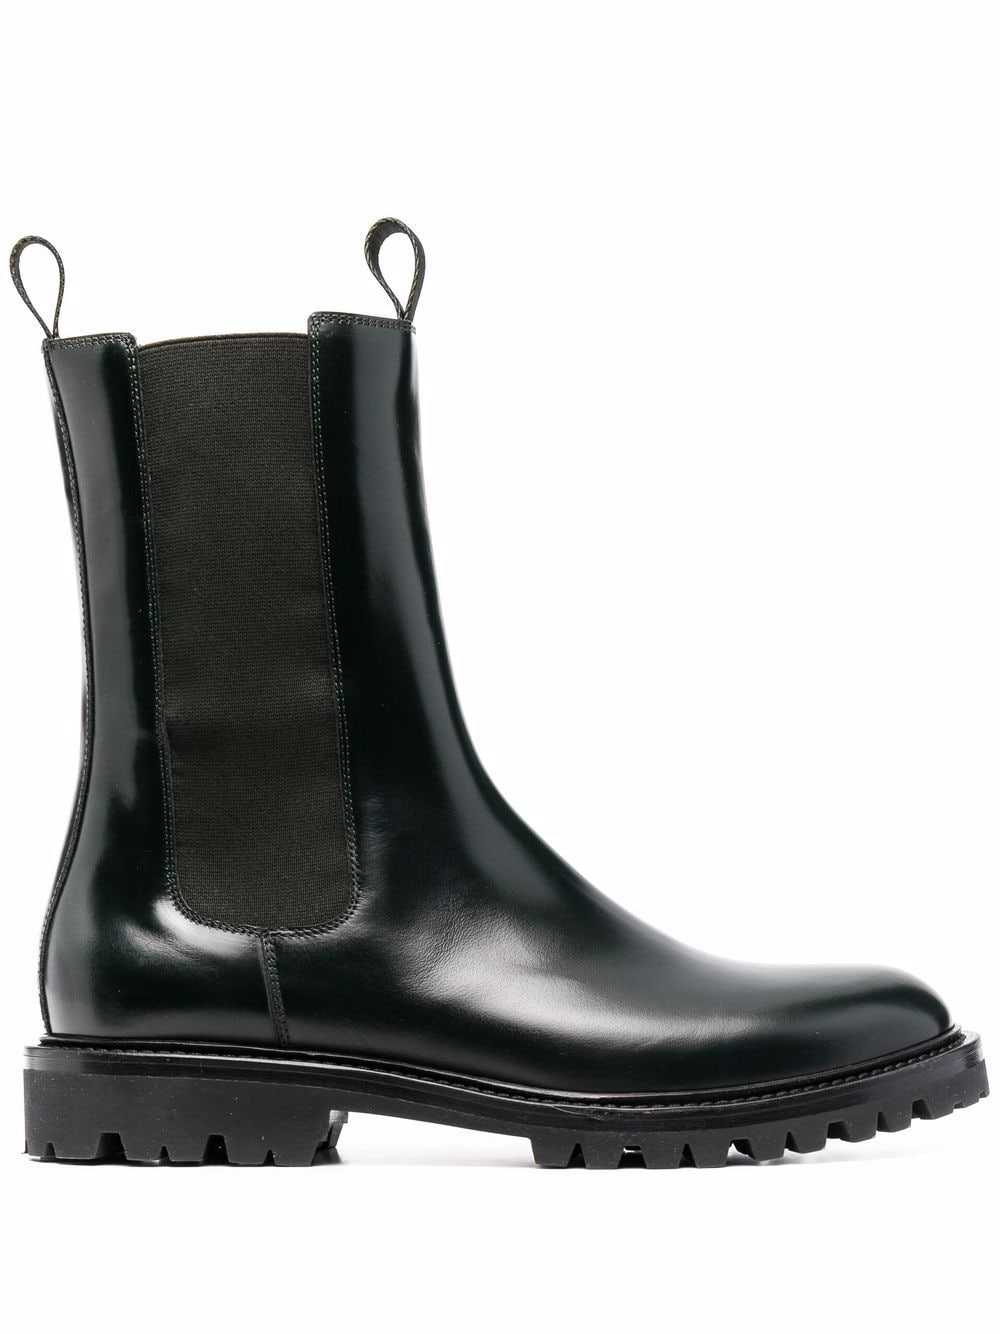 Scarosso Nick Wooster Boots - Farfetch